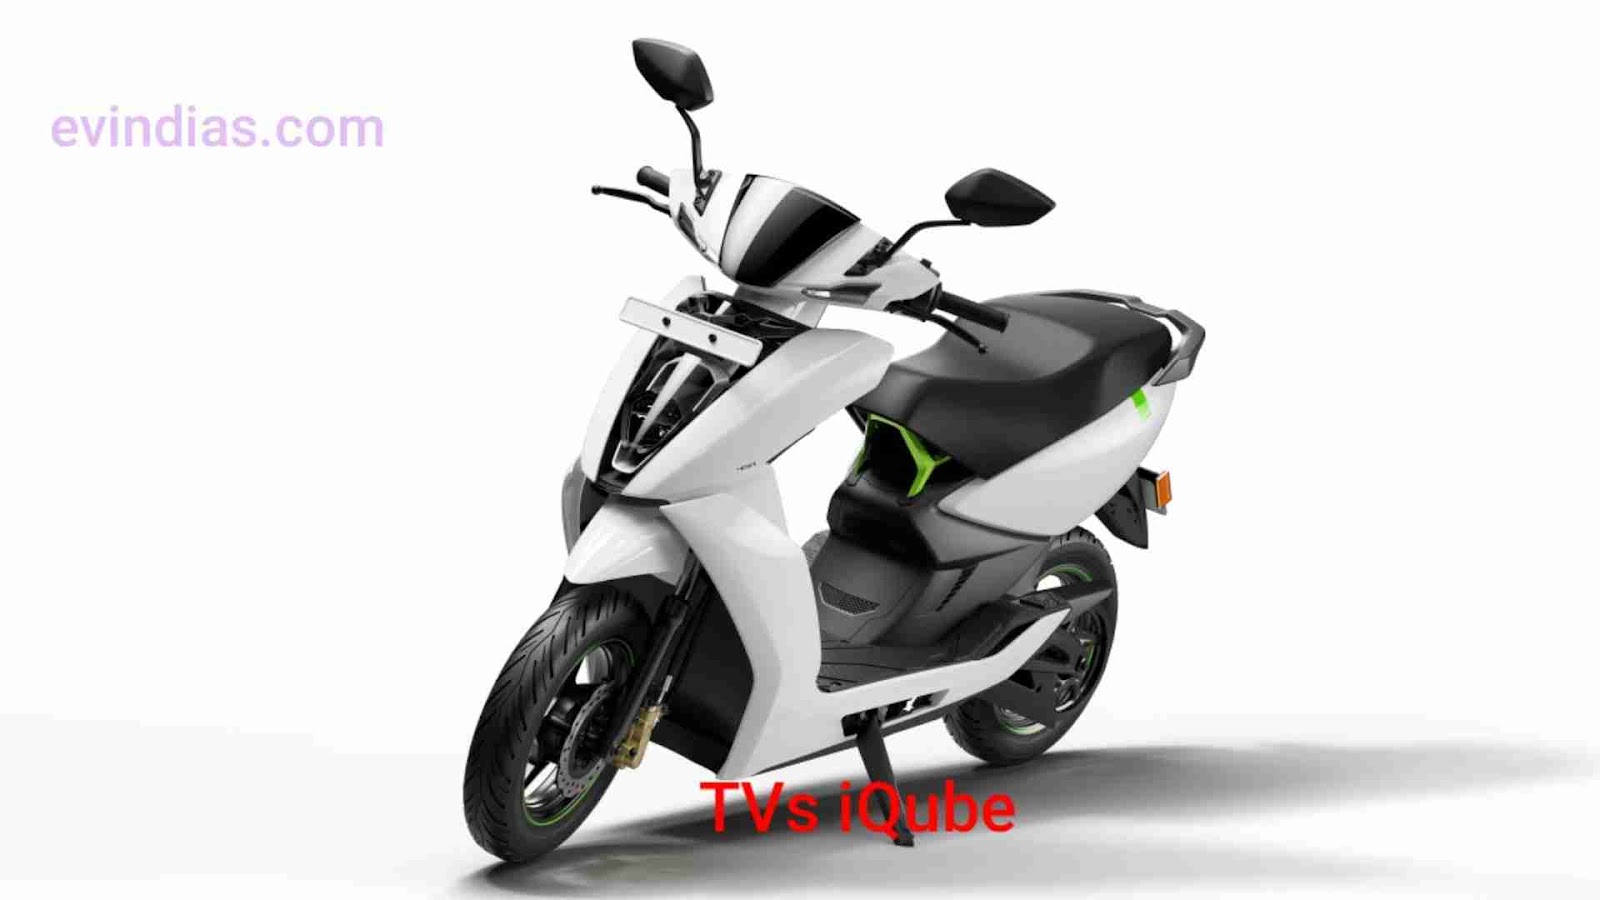 TVs iQube electric scooter